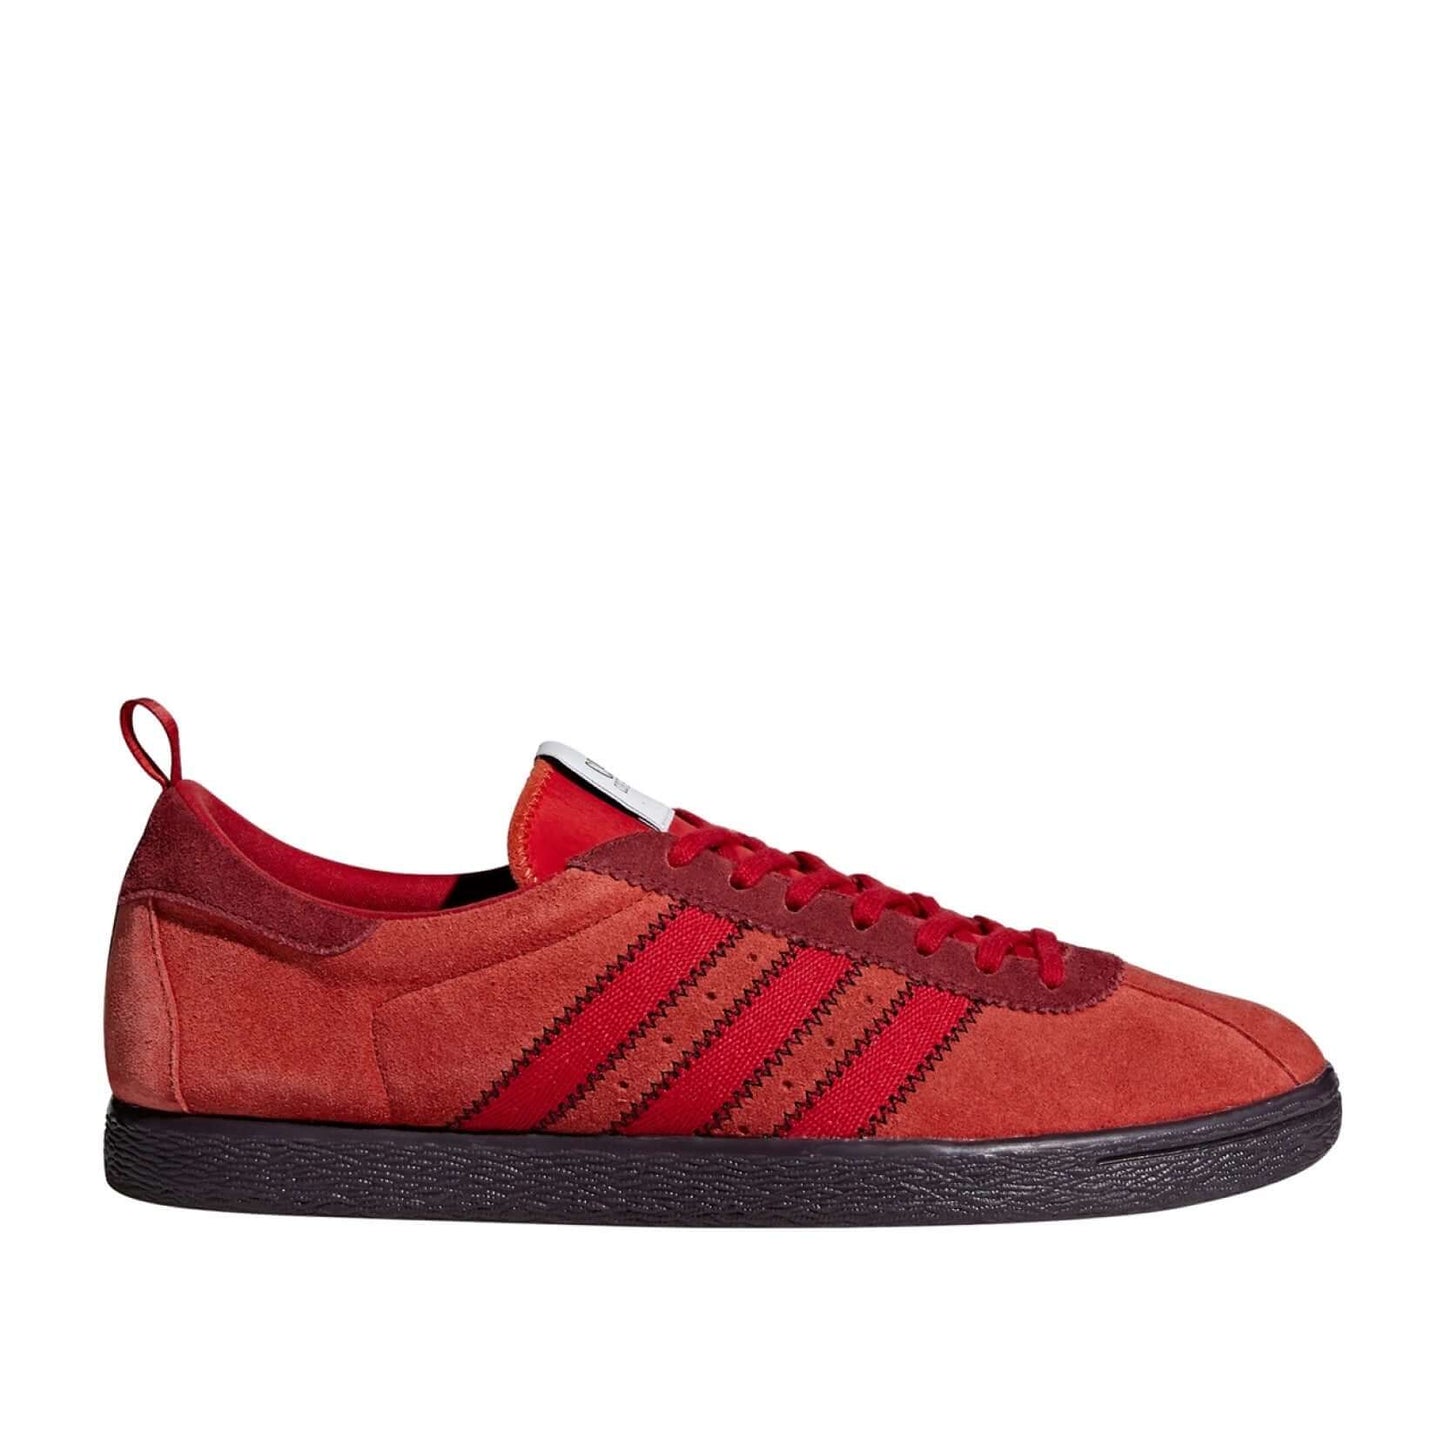 C.P Company Tobacco from Adidas